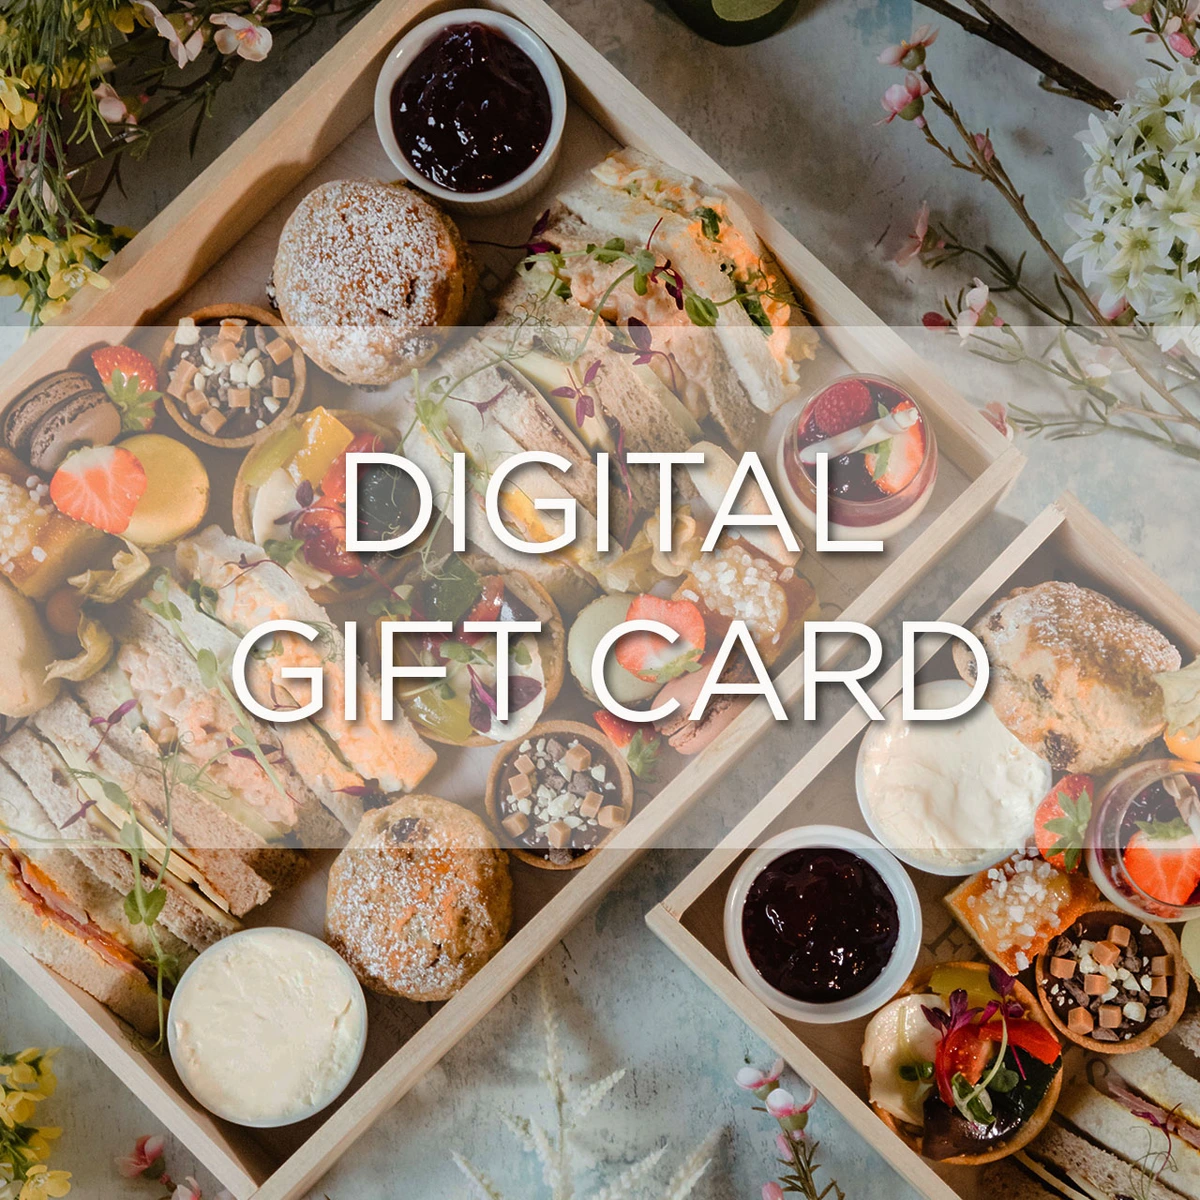 Digital Gift Card - High Tea for Two